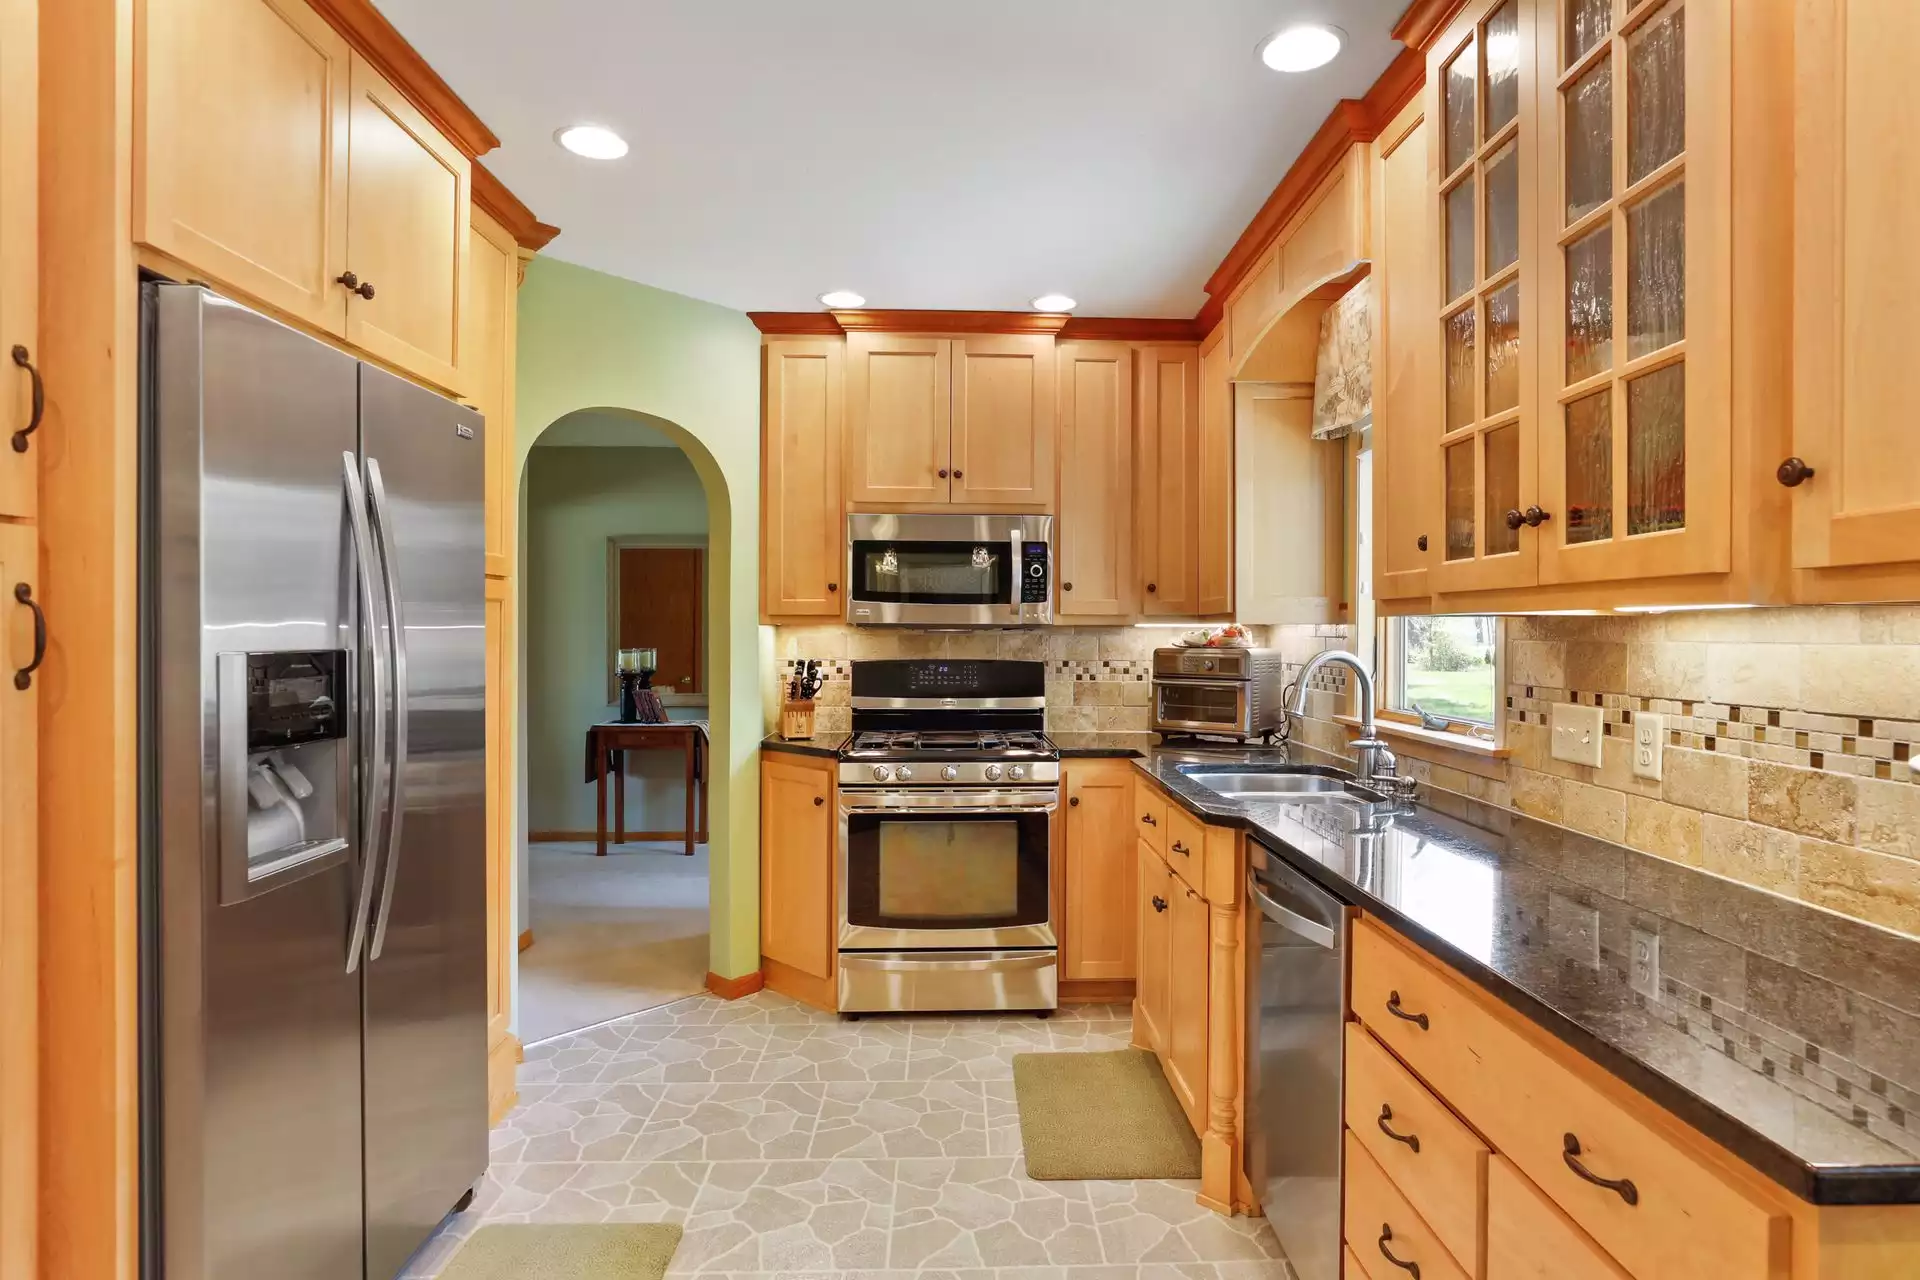 Maplewood Home For Sale Kitchen Stainless Steel Appliances